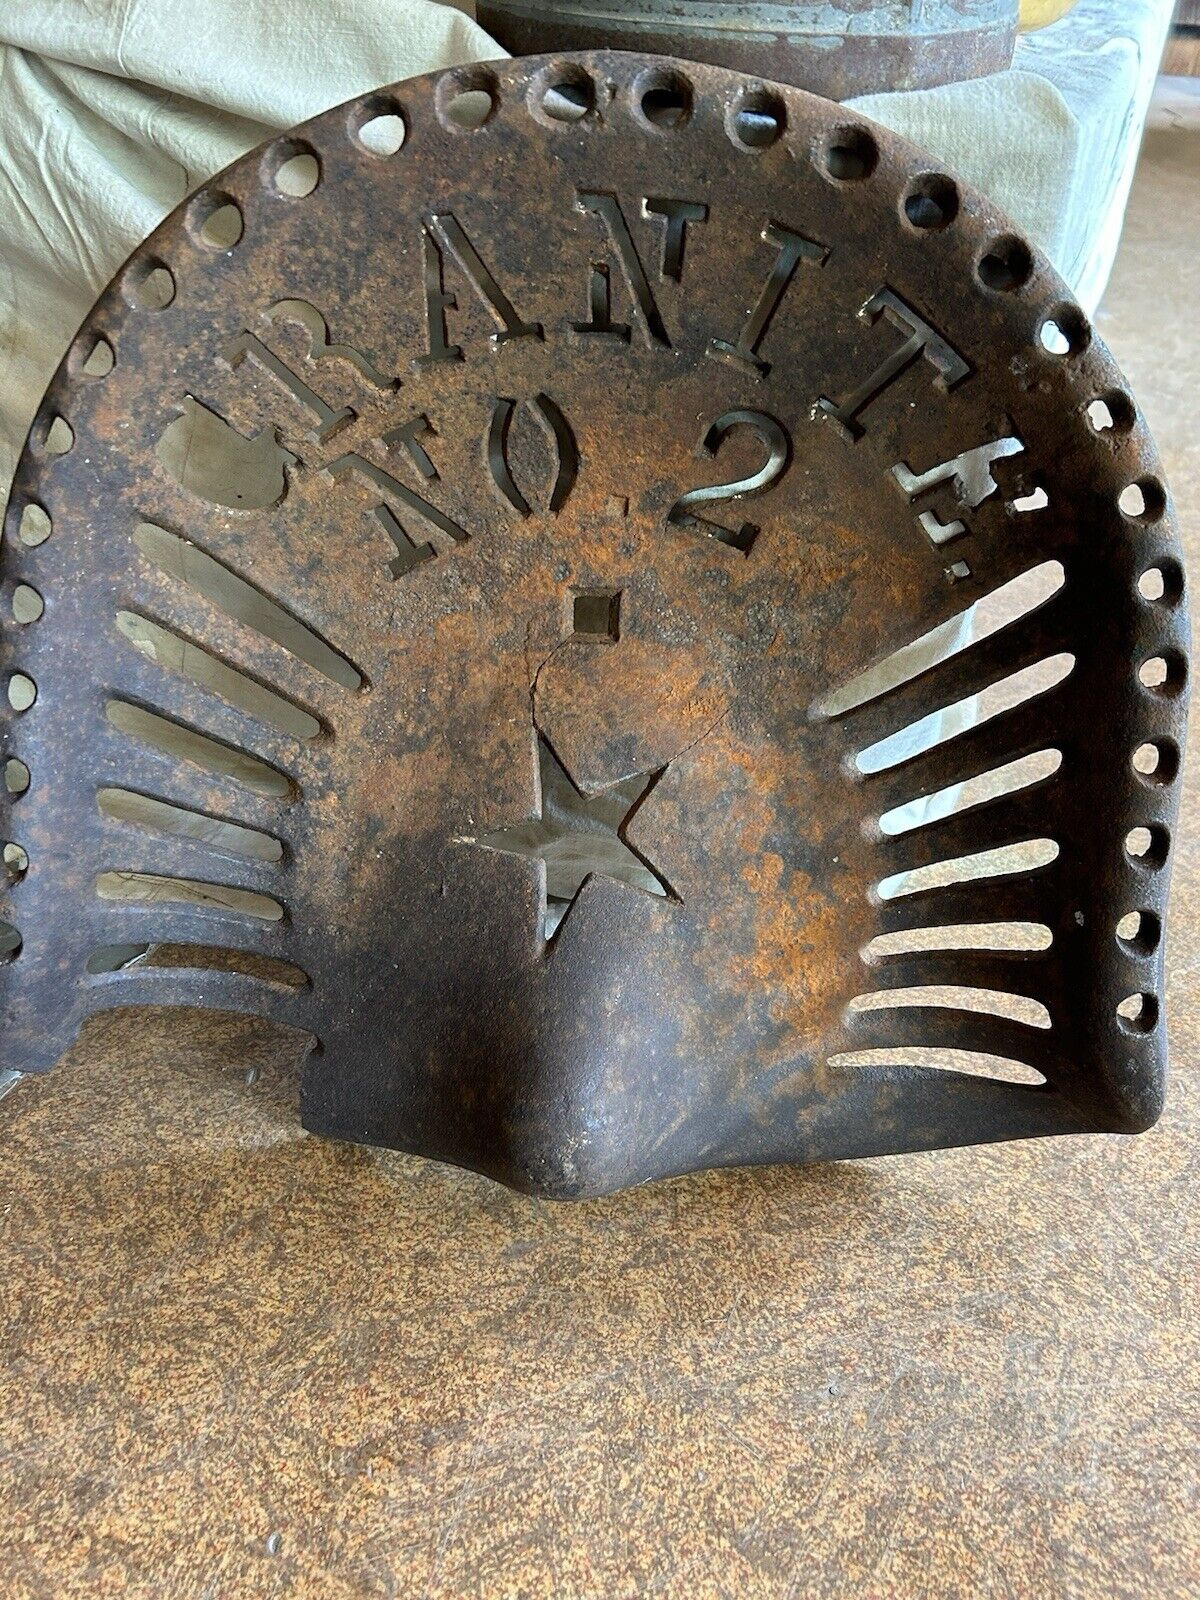 Vintage Cast Iron Tractor Seat With The Word “granite”